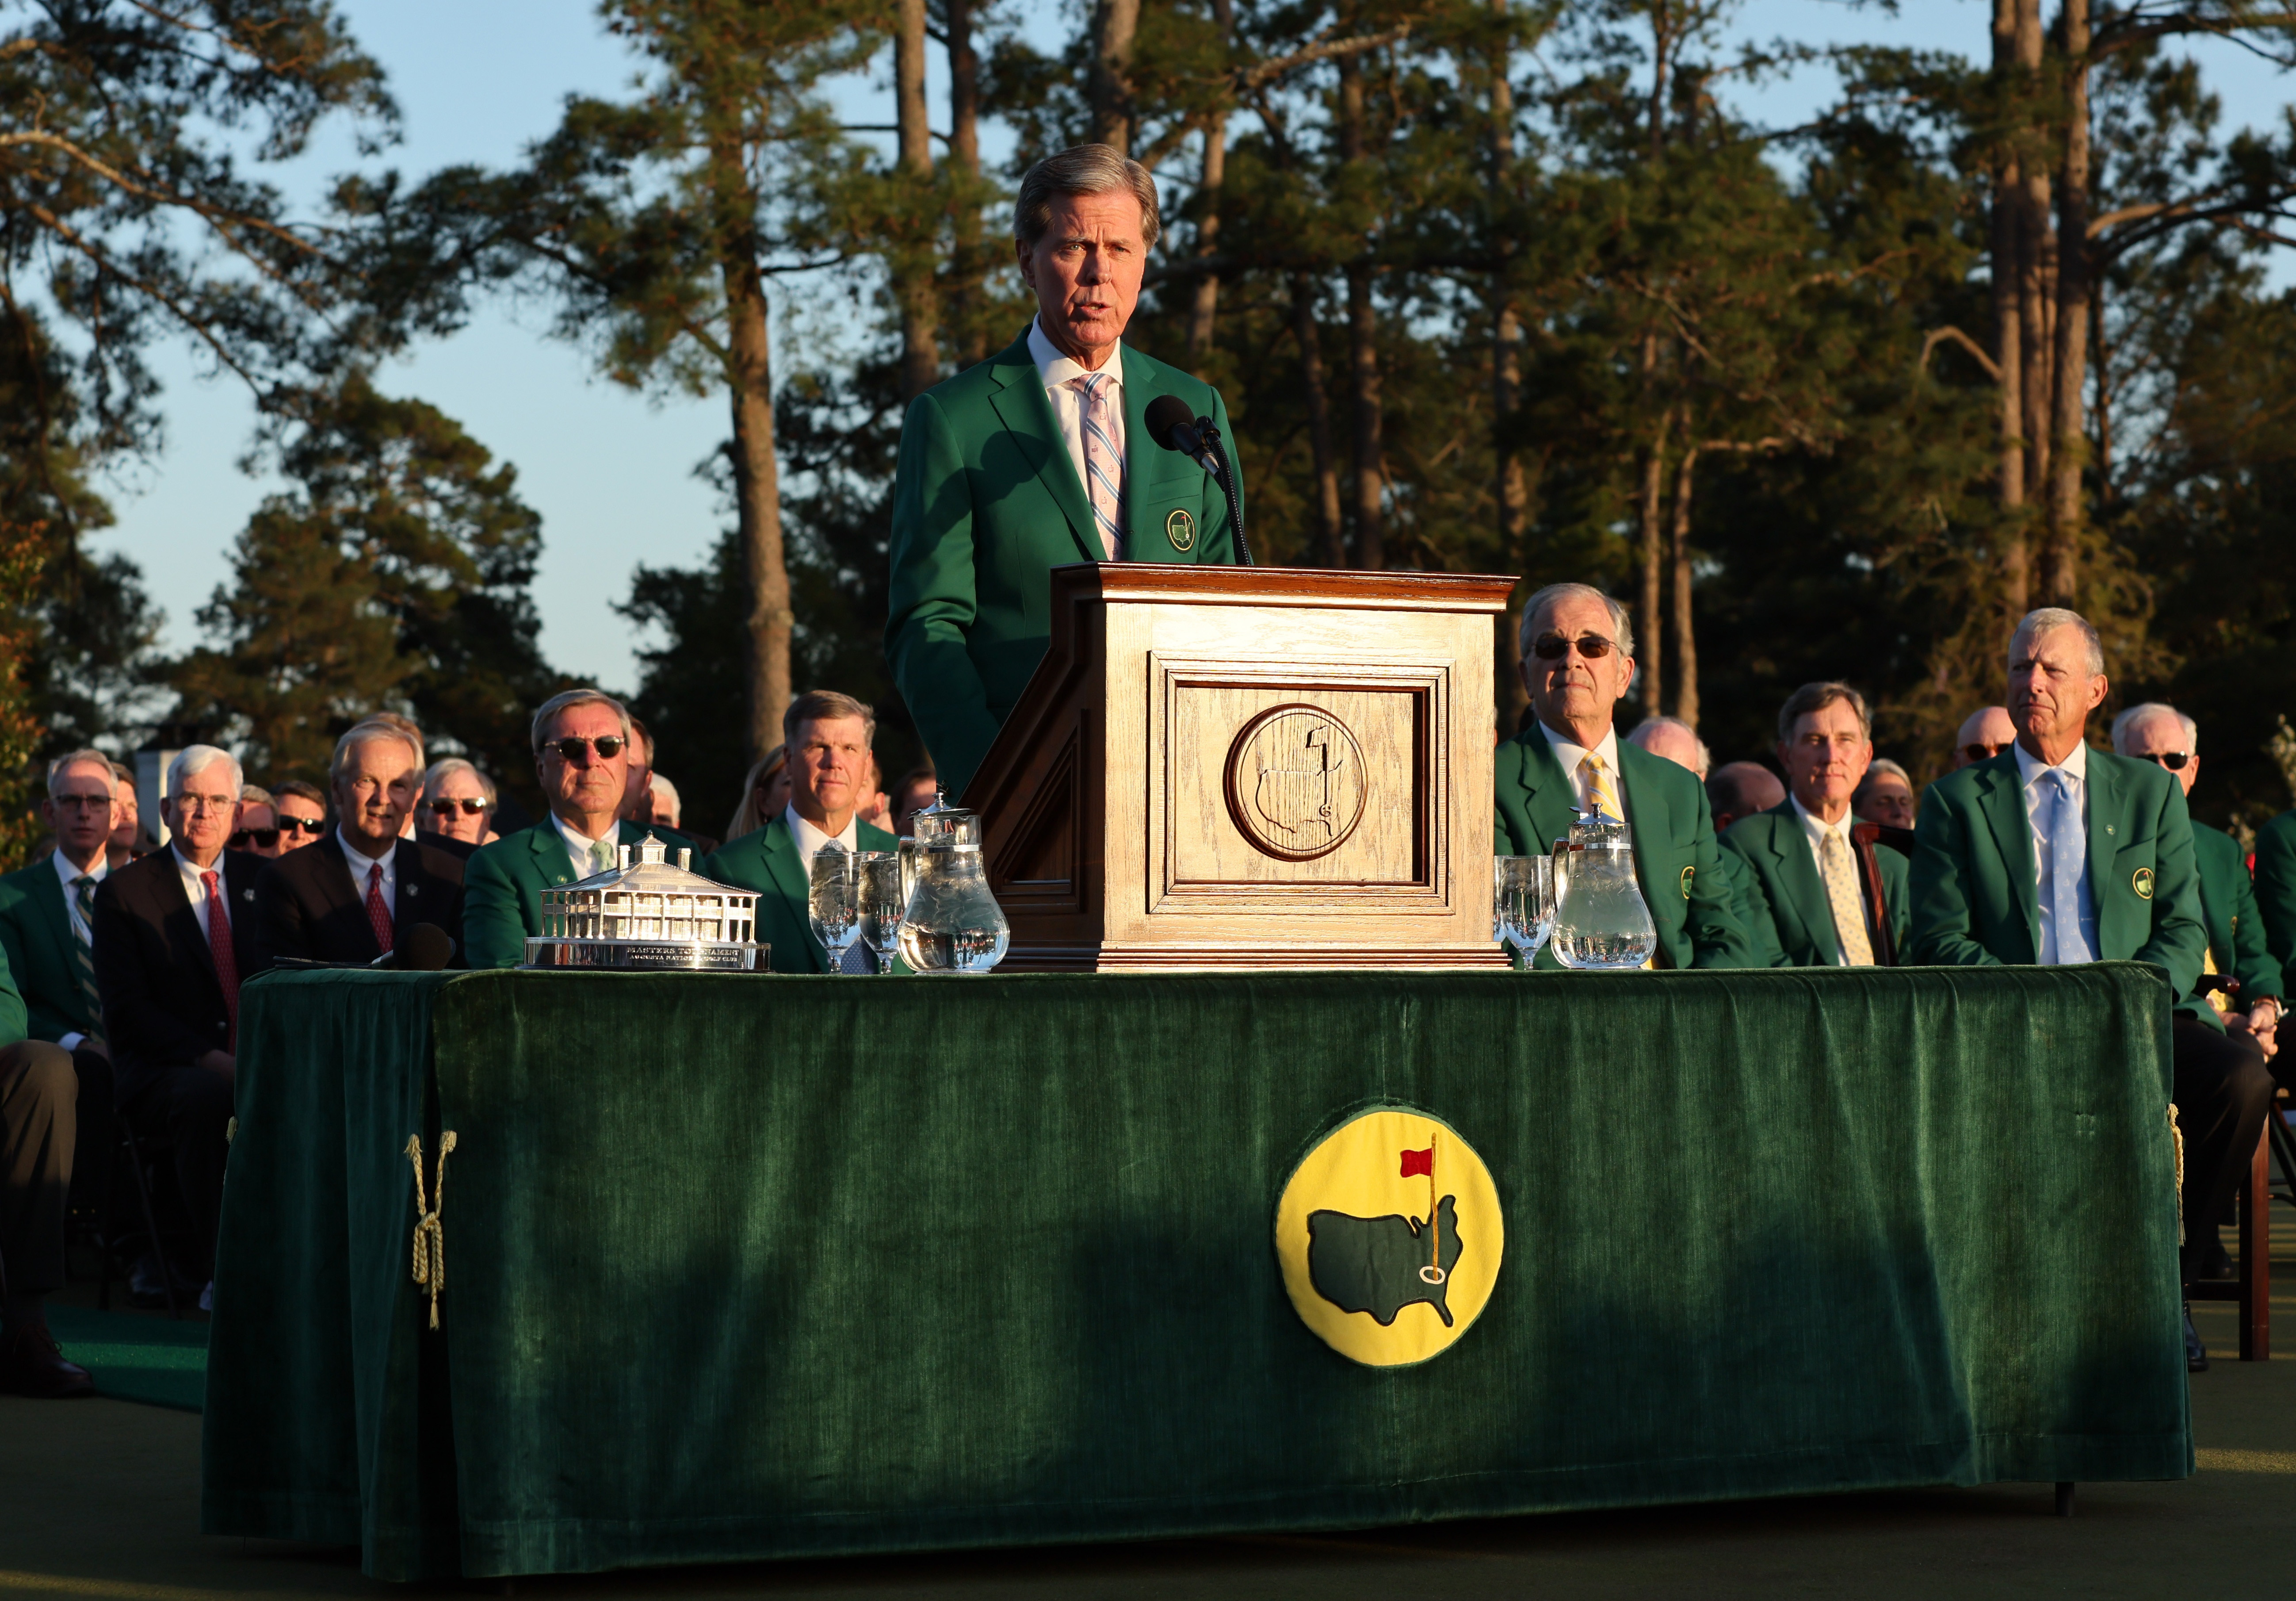 2023 Masters expands field to 80 golfers with special invitations accepted  by NCAA champion, Japanese star 